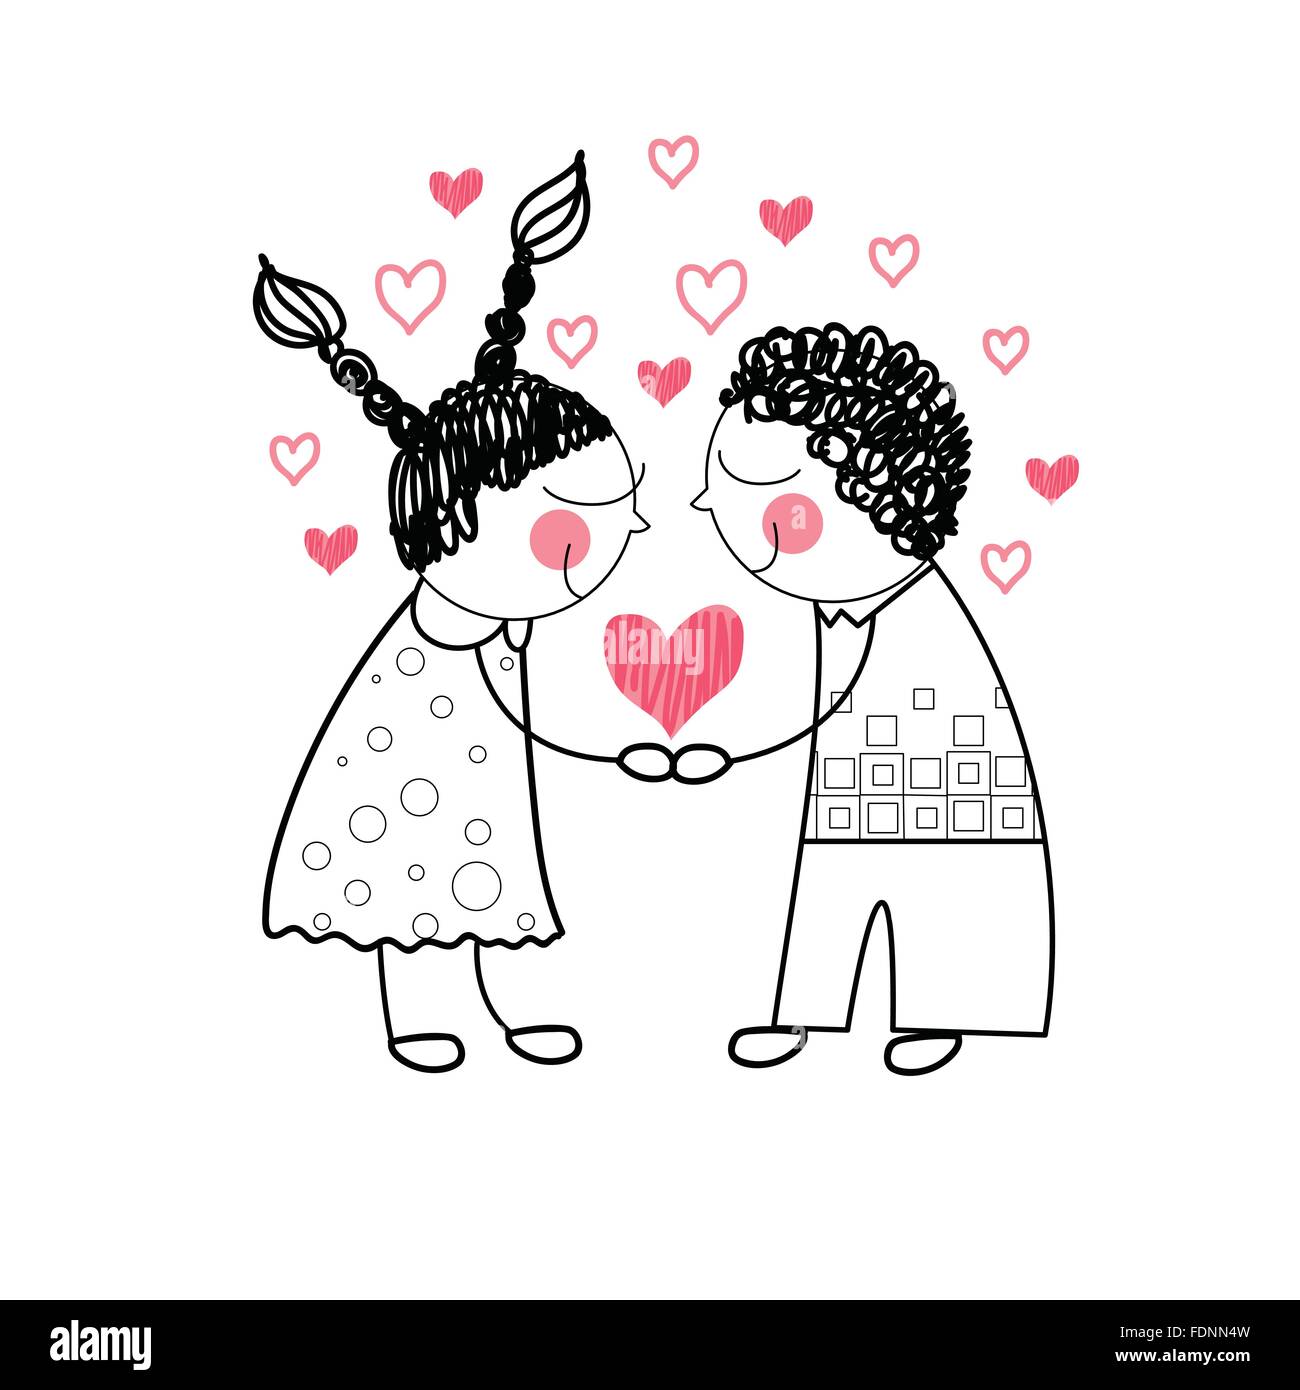 Romantic Couple Line Drawing Images | Free Photos, PNG Stickers, Wallpapers  & Backgrounds - rawpixel